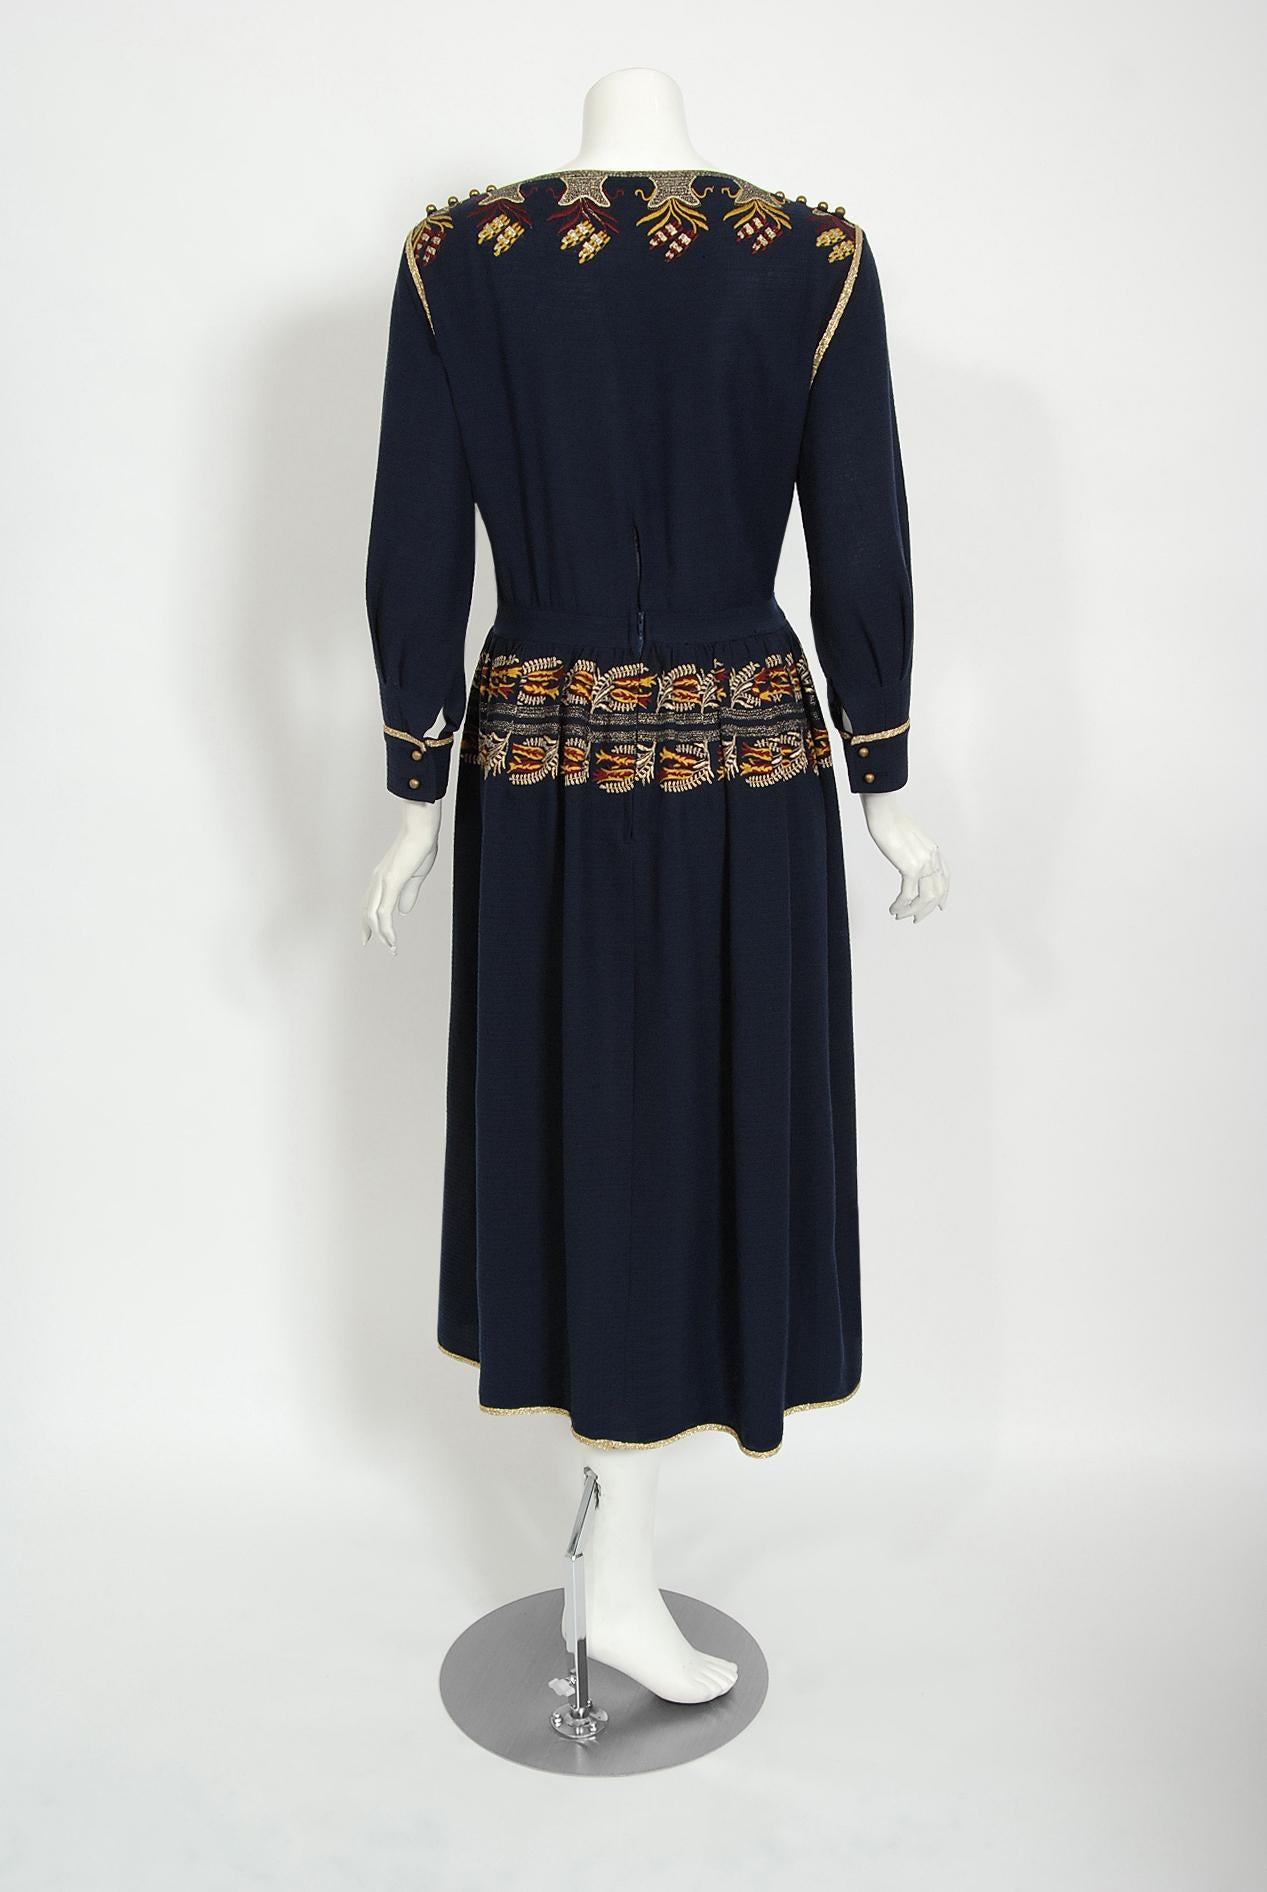 Vintage 1979 Karl Lagerfeld for Chloe Navy Blue Metallic Embroidered Knit Dress 6